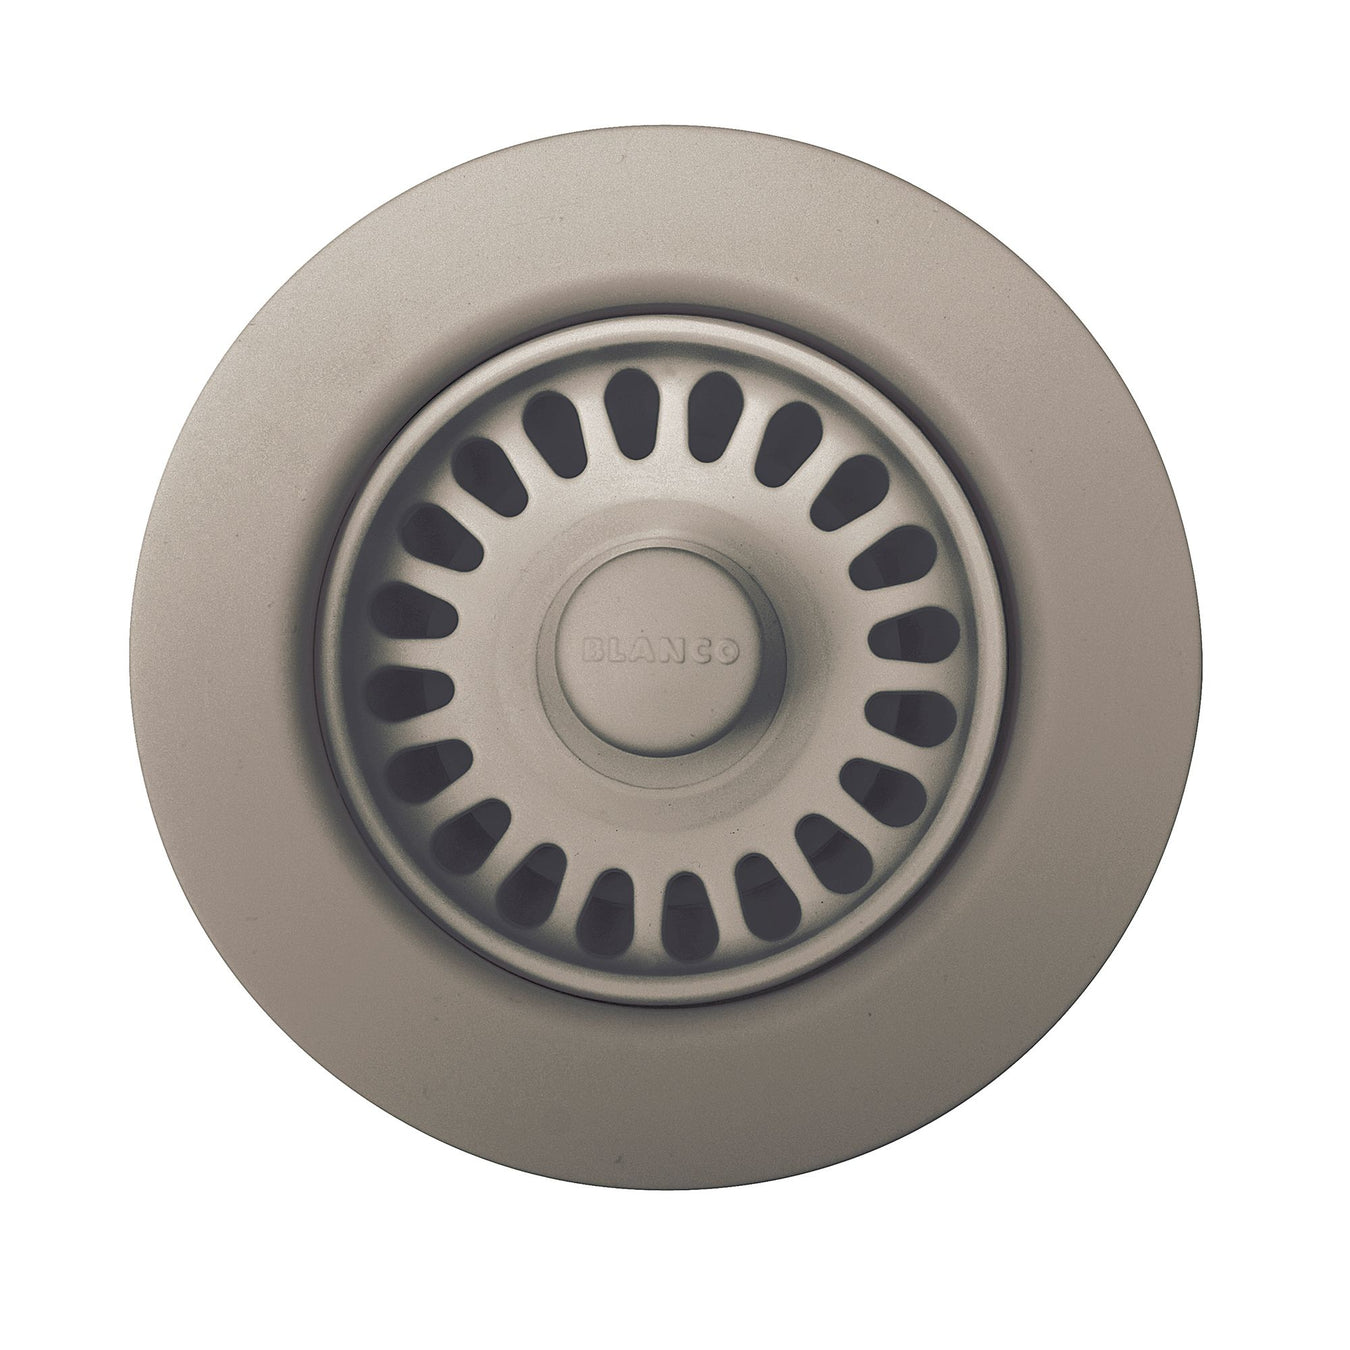 BLANCO Sink Drains and Disposer Flanges